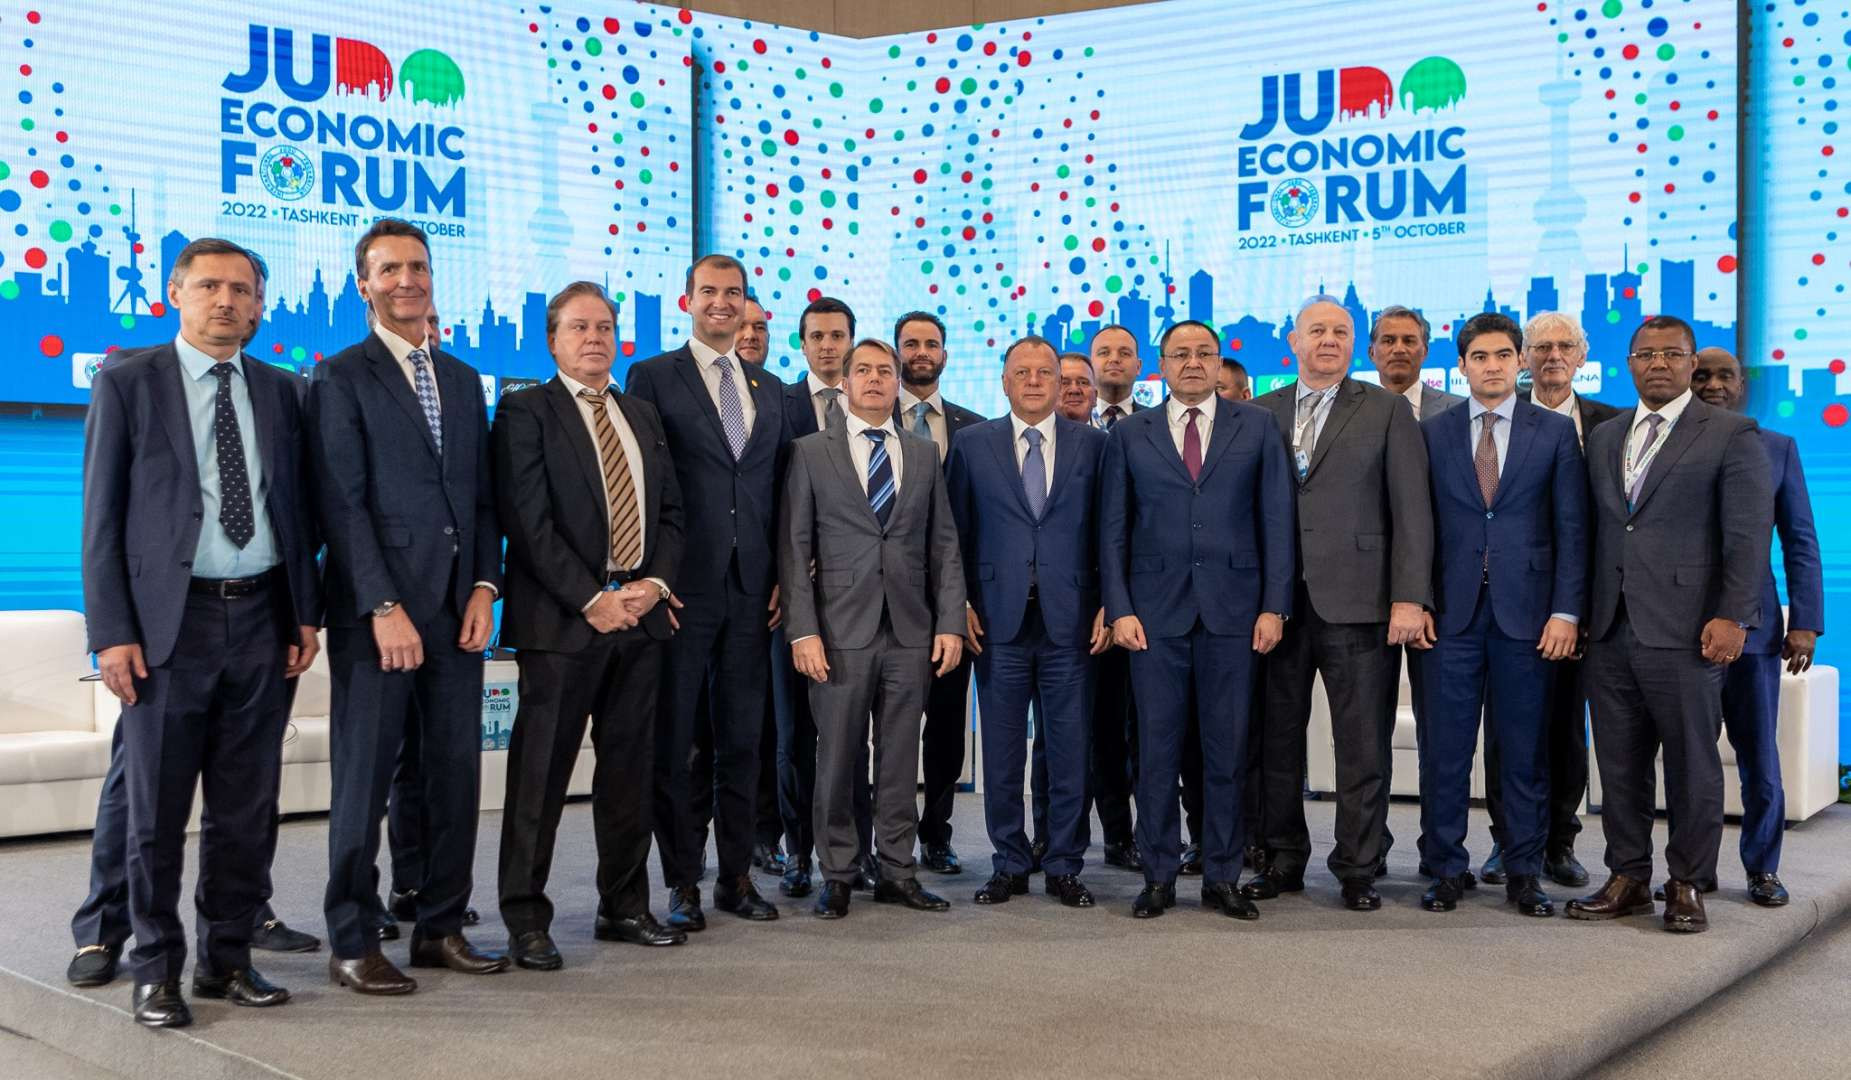 IJF stages first Judo Economic Forum in bid to develop sport's relationship with finance